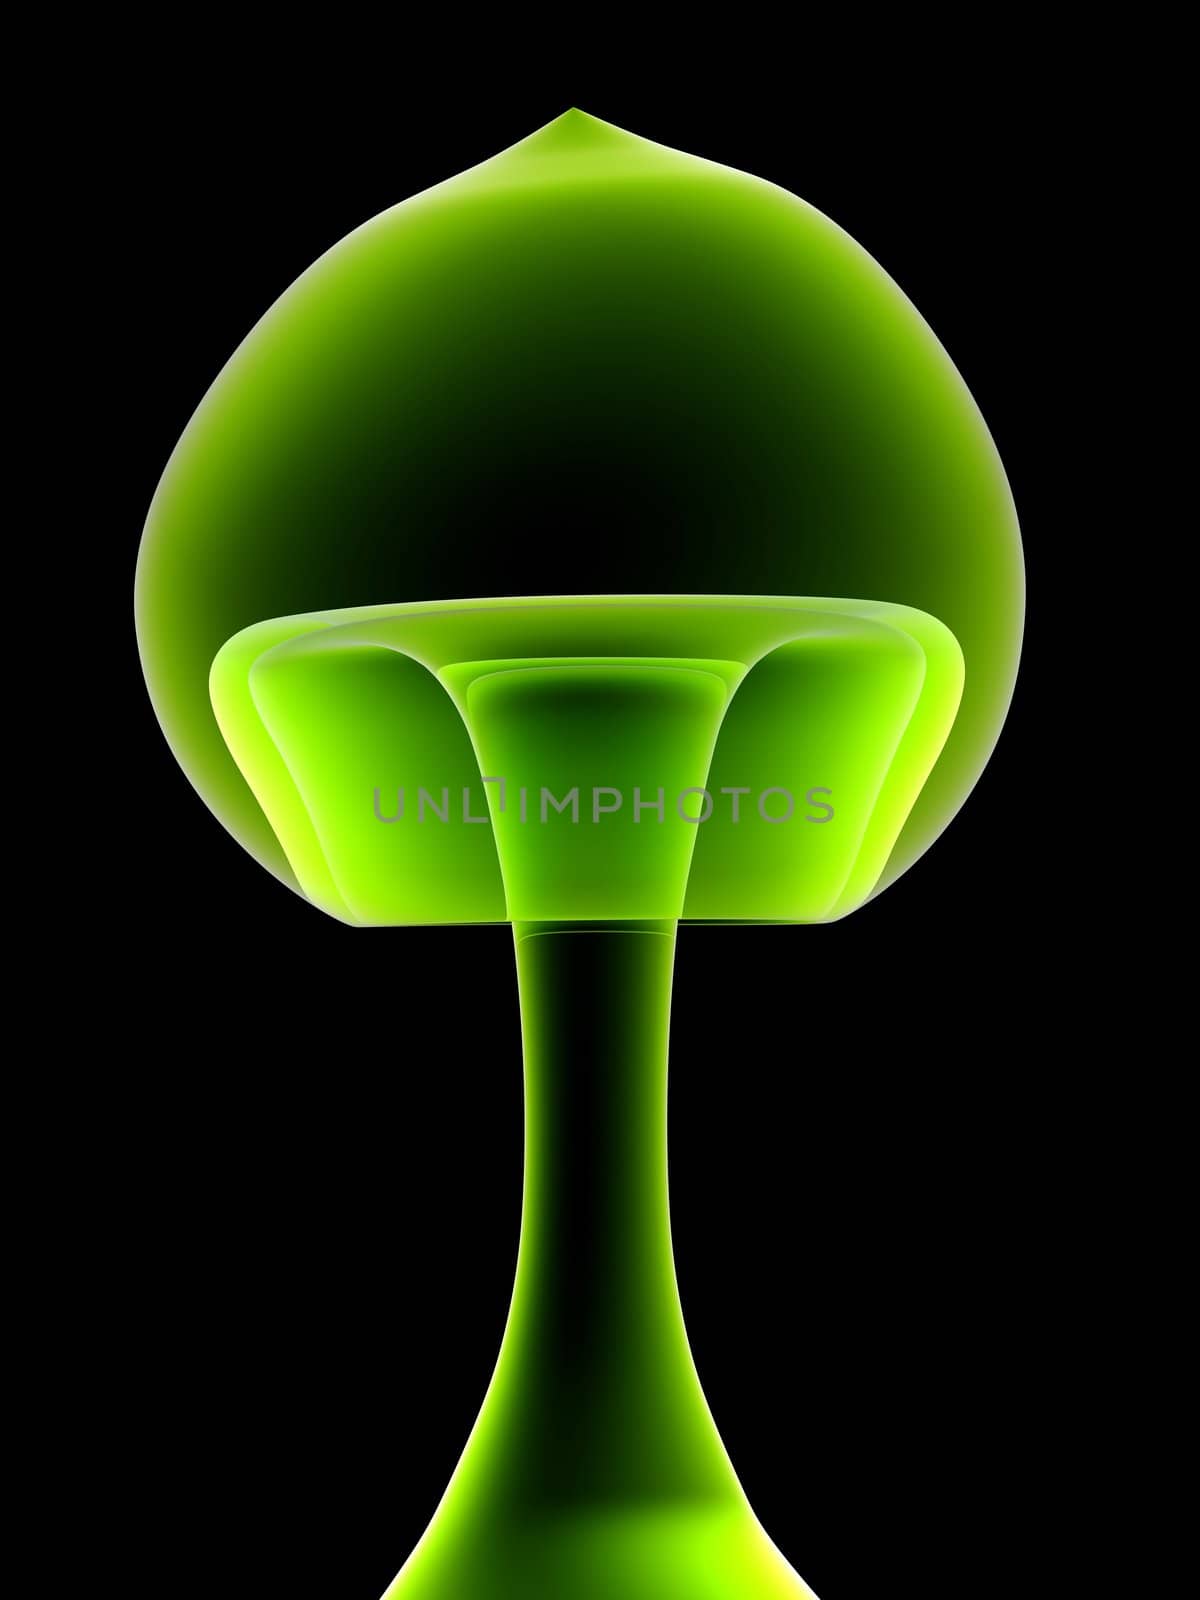 3D rendered colored, translucent Mushrooms. Isolated on black.
